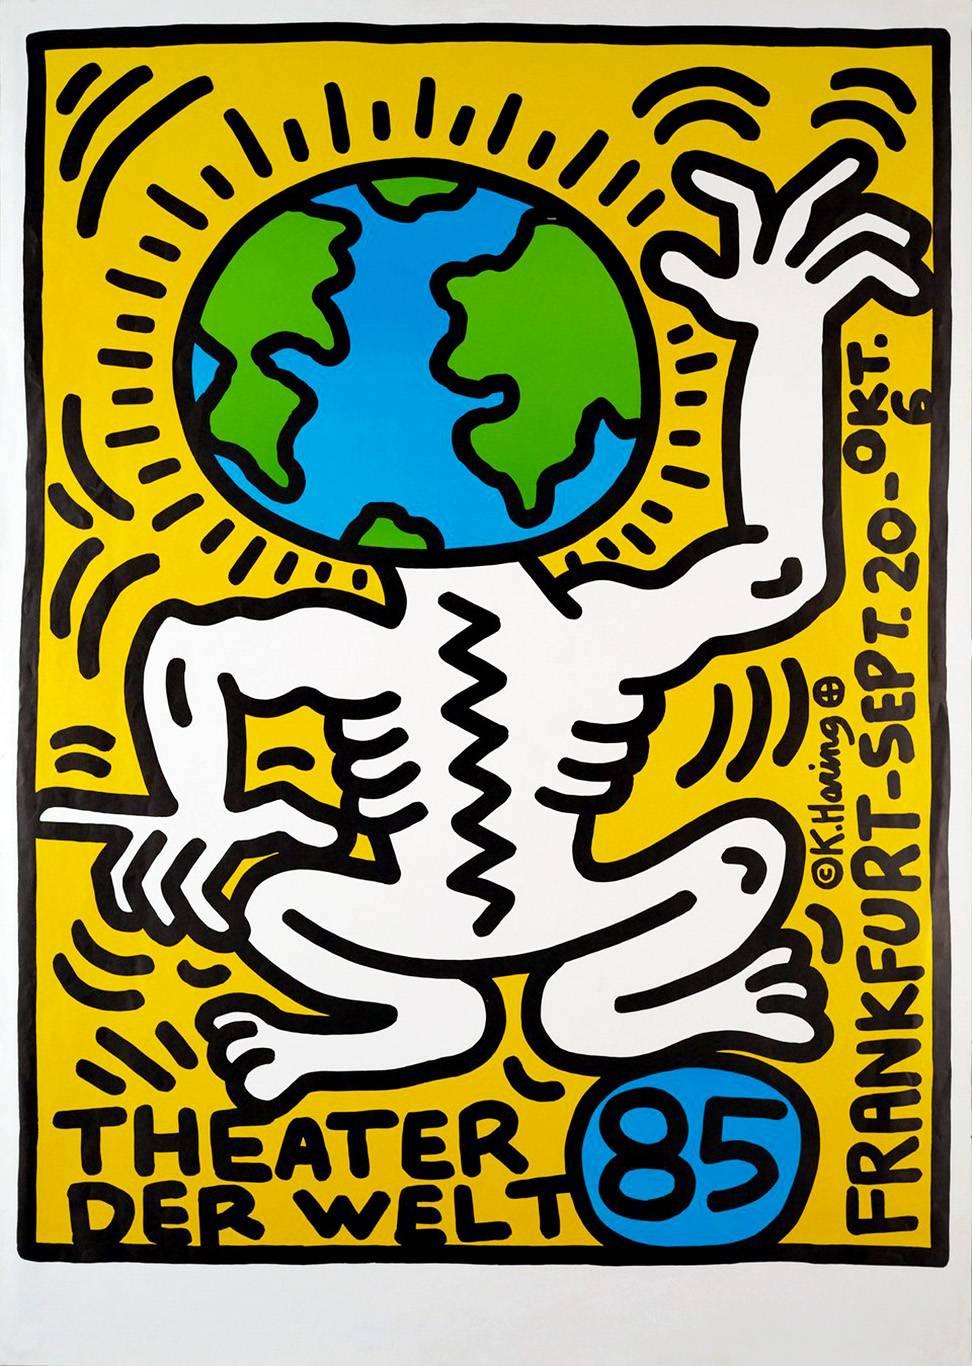 Keith Haring, Theater der Welt Lithograph, Frankfurt, Germany 1985 
Original 1st printing produced during Haring's lifetime. Bold, stand-out colors hat make for brilliant Haring wall art within reach. 

Serigraph on vellum enriched paper
47 x 33